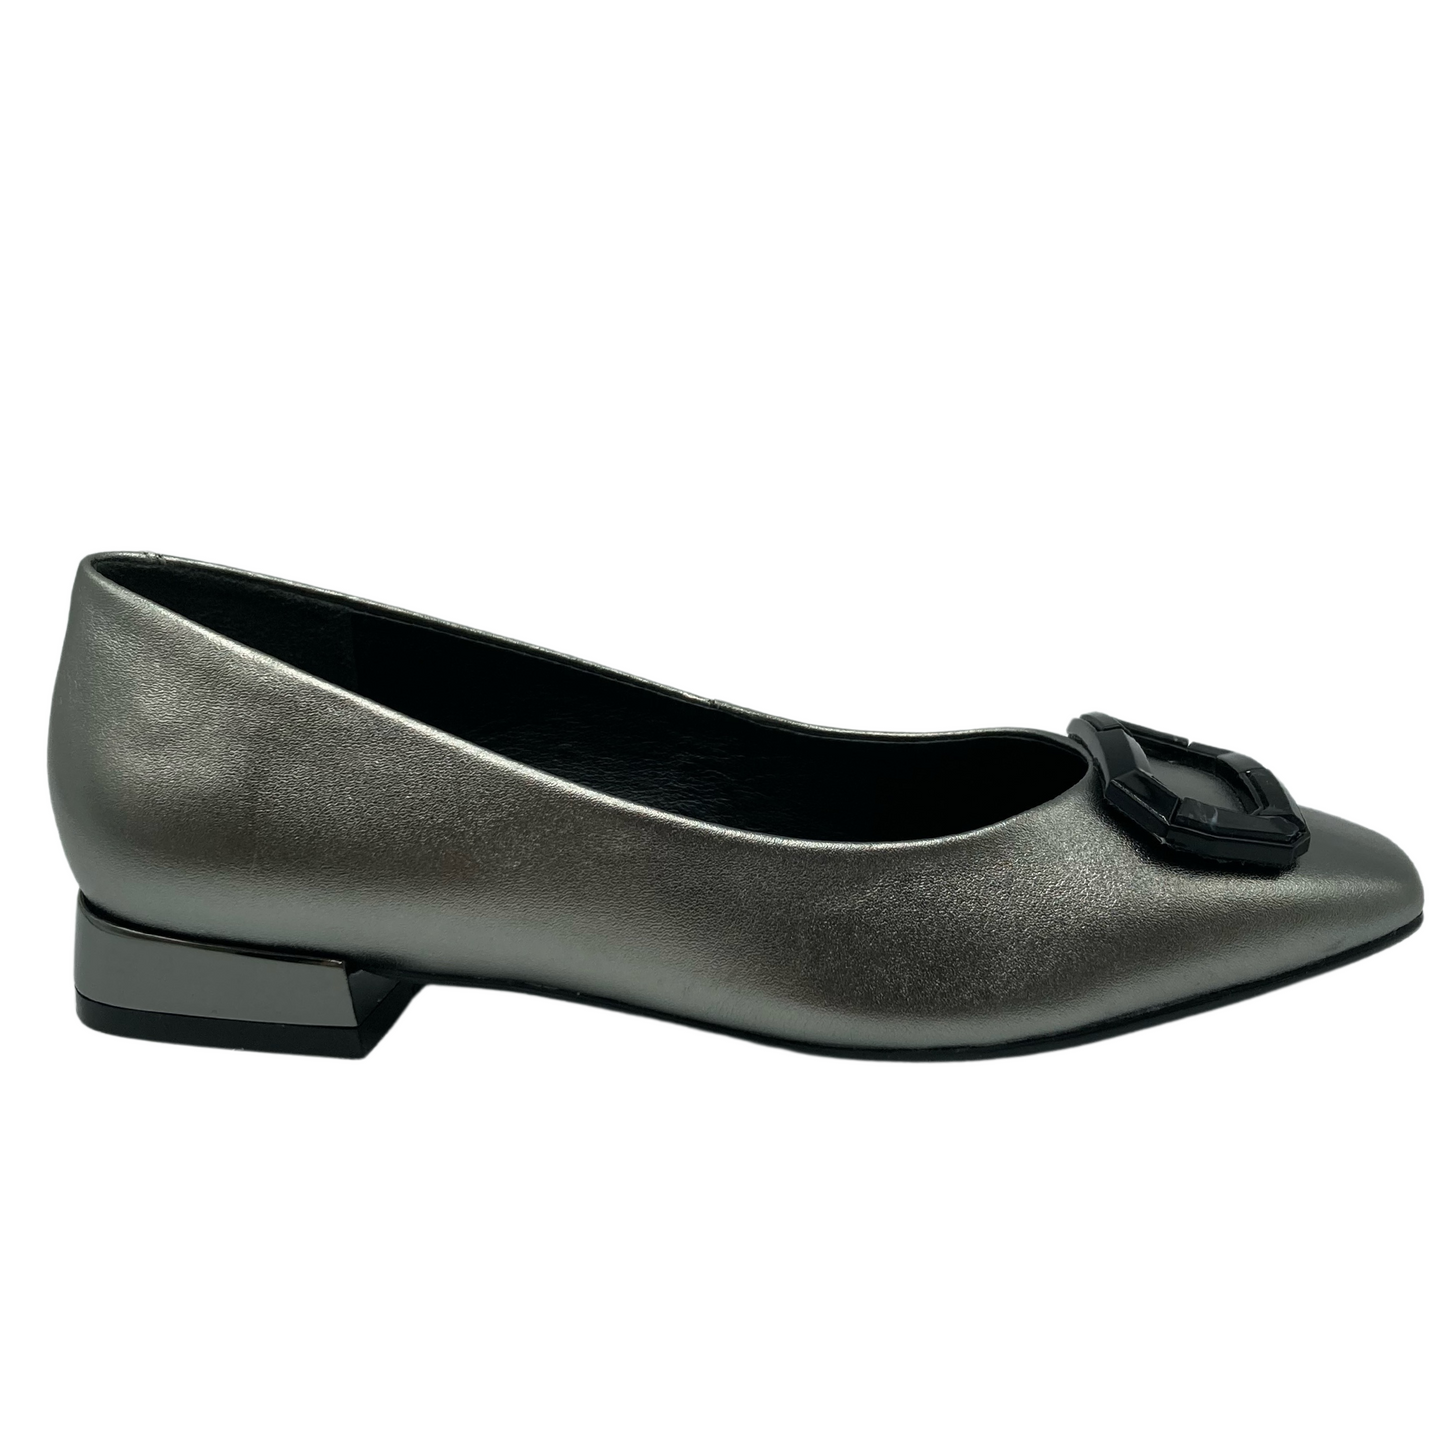 Right facing view of silver ballet flat with short block heel and black buckle detail on toe